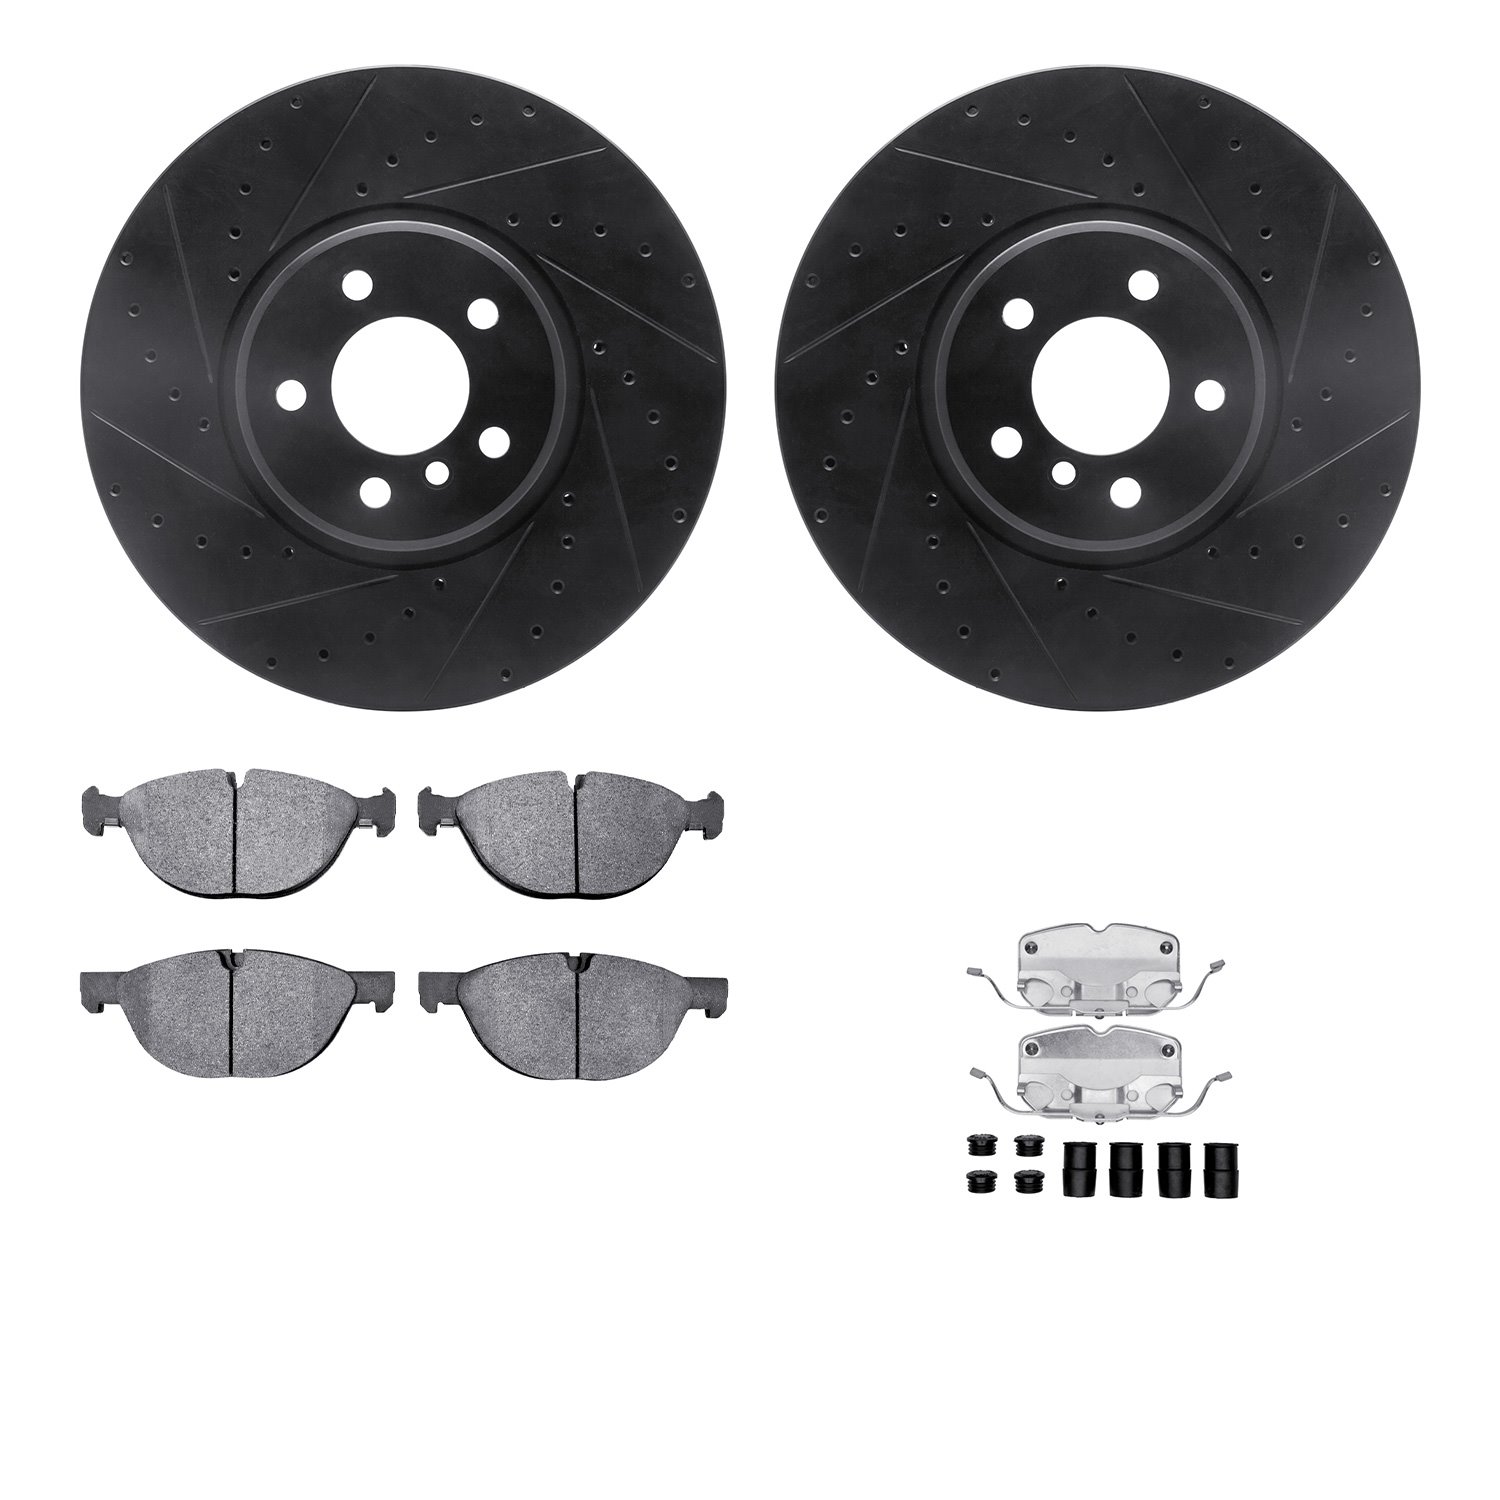 8312-31097 Drilled/Slotted Brake Rotors with 3000-Series Ceramic Brake Pads Kit & Hardware [Black], 2008-2019 BMW, Position: Fro